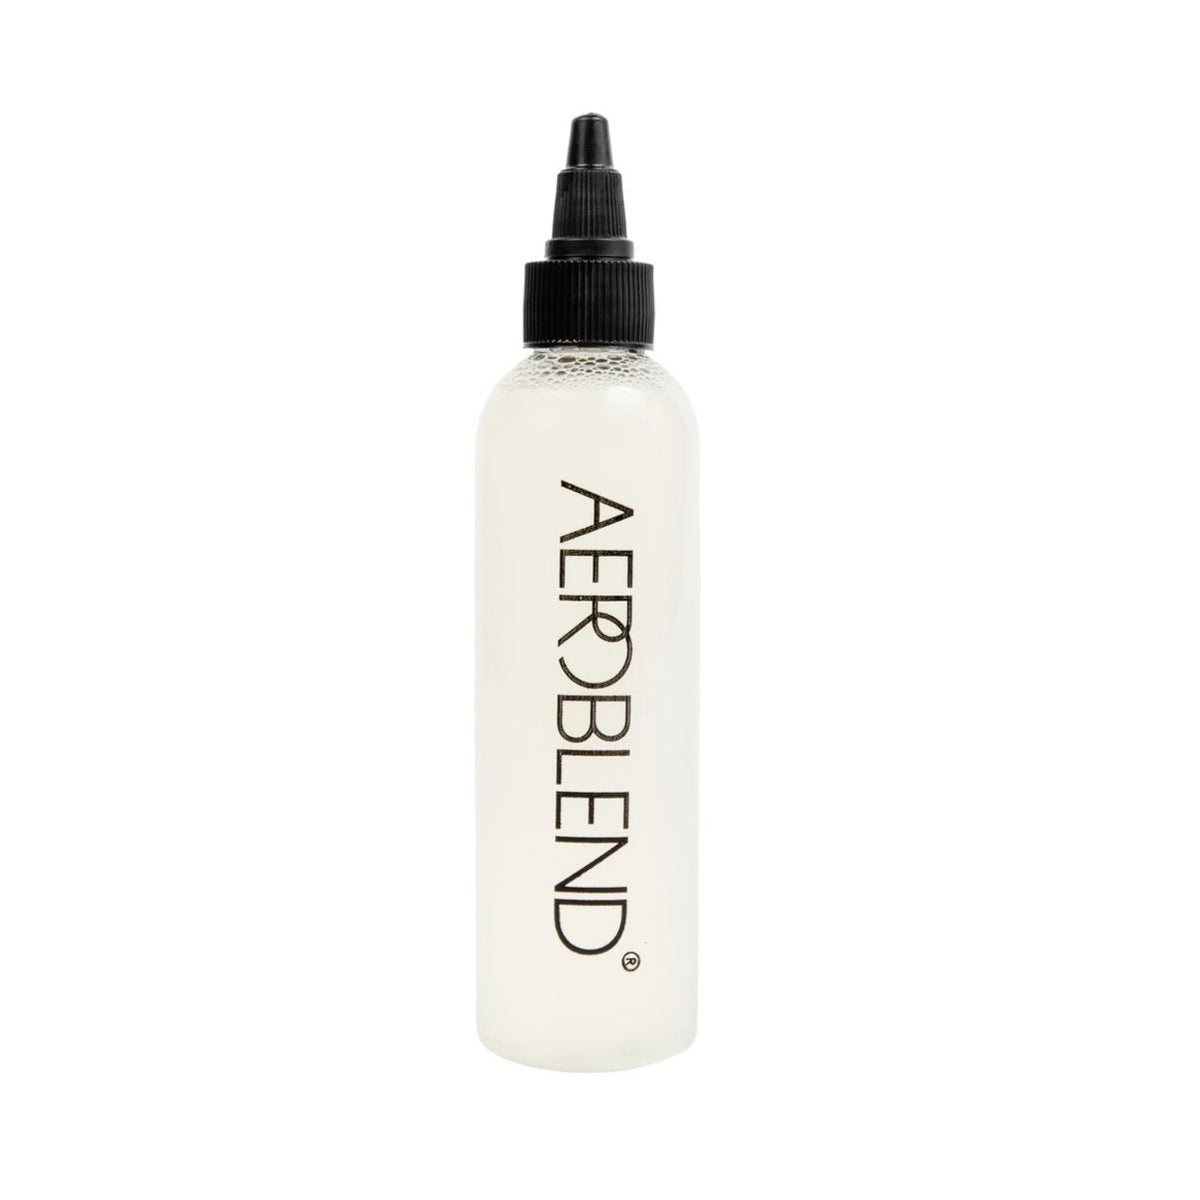 Airbrush makeup cleaner for your aeroblend stylus